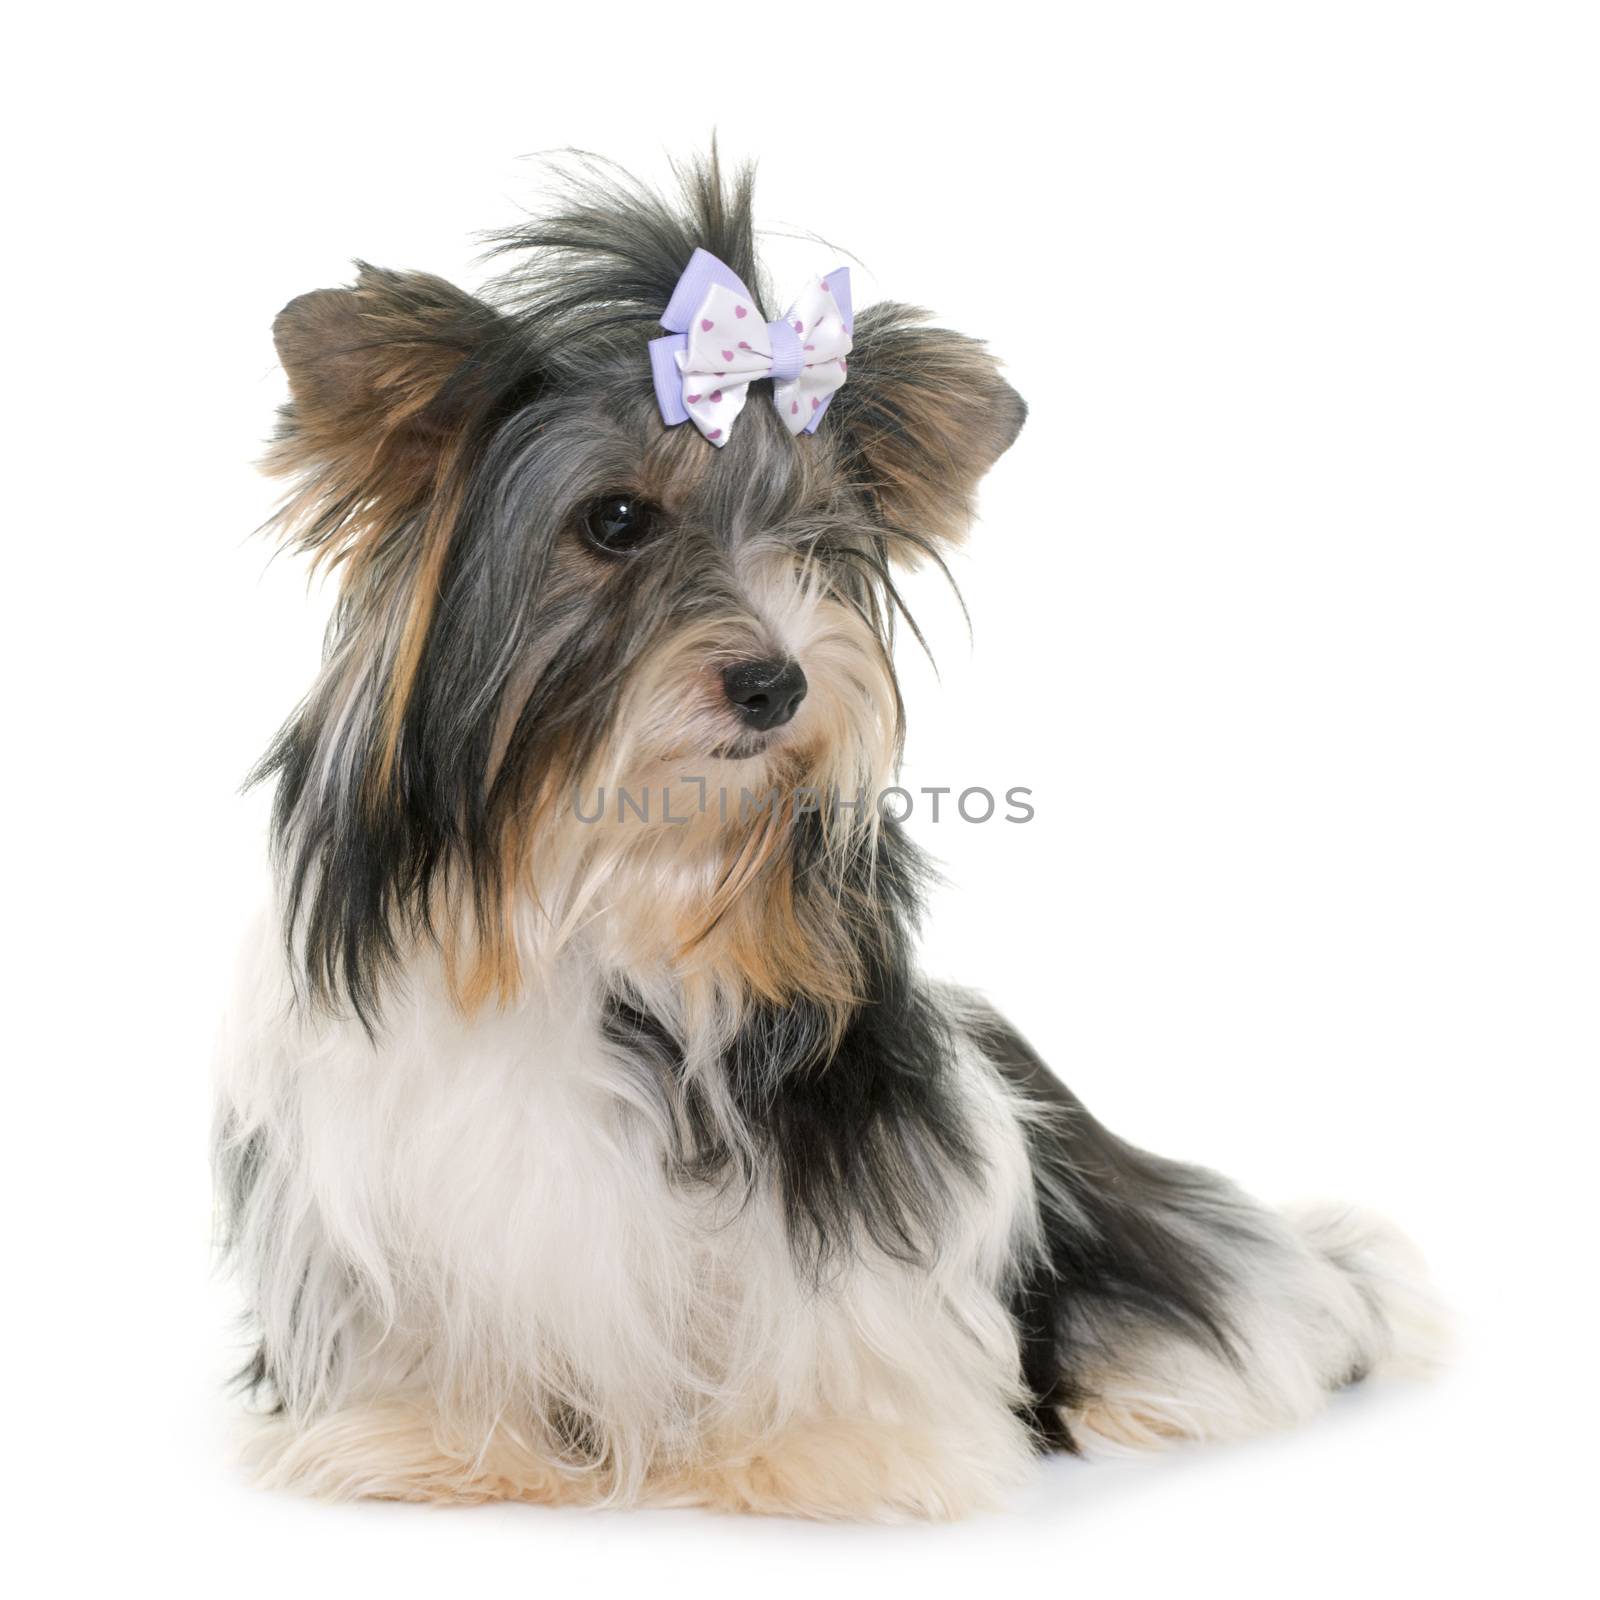 biewer yorkshire terrier in front of white background